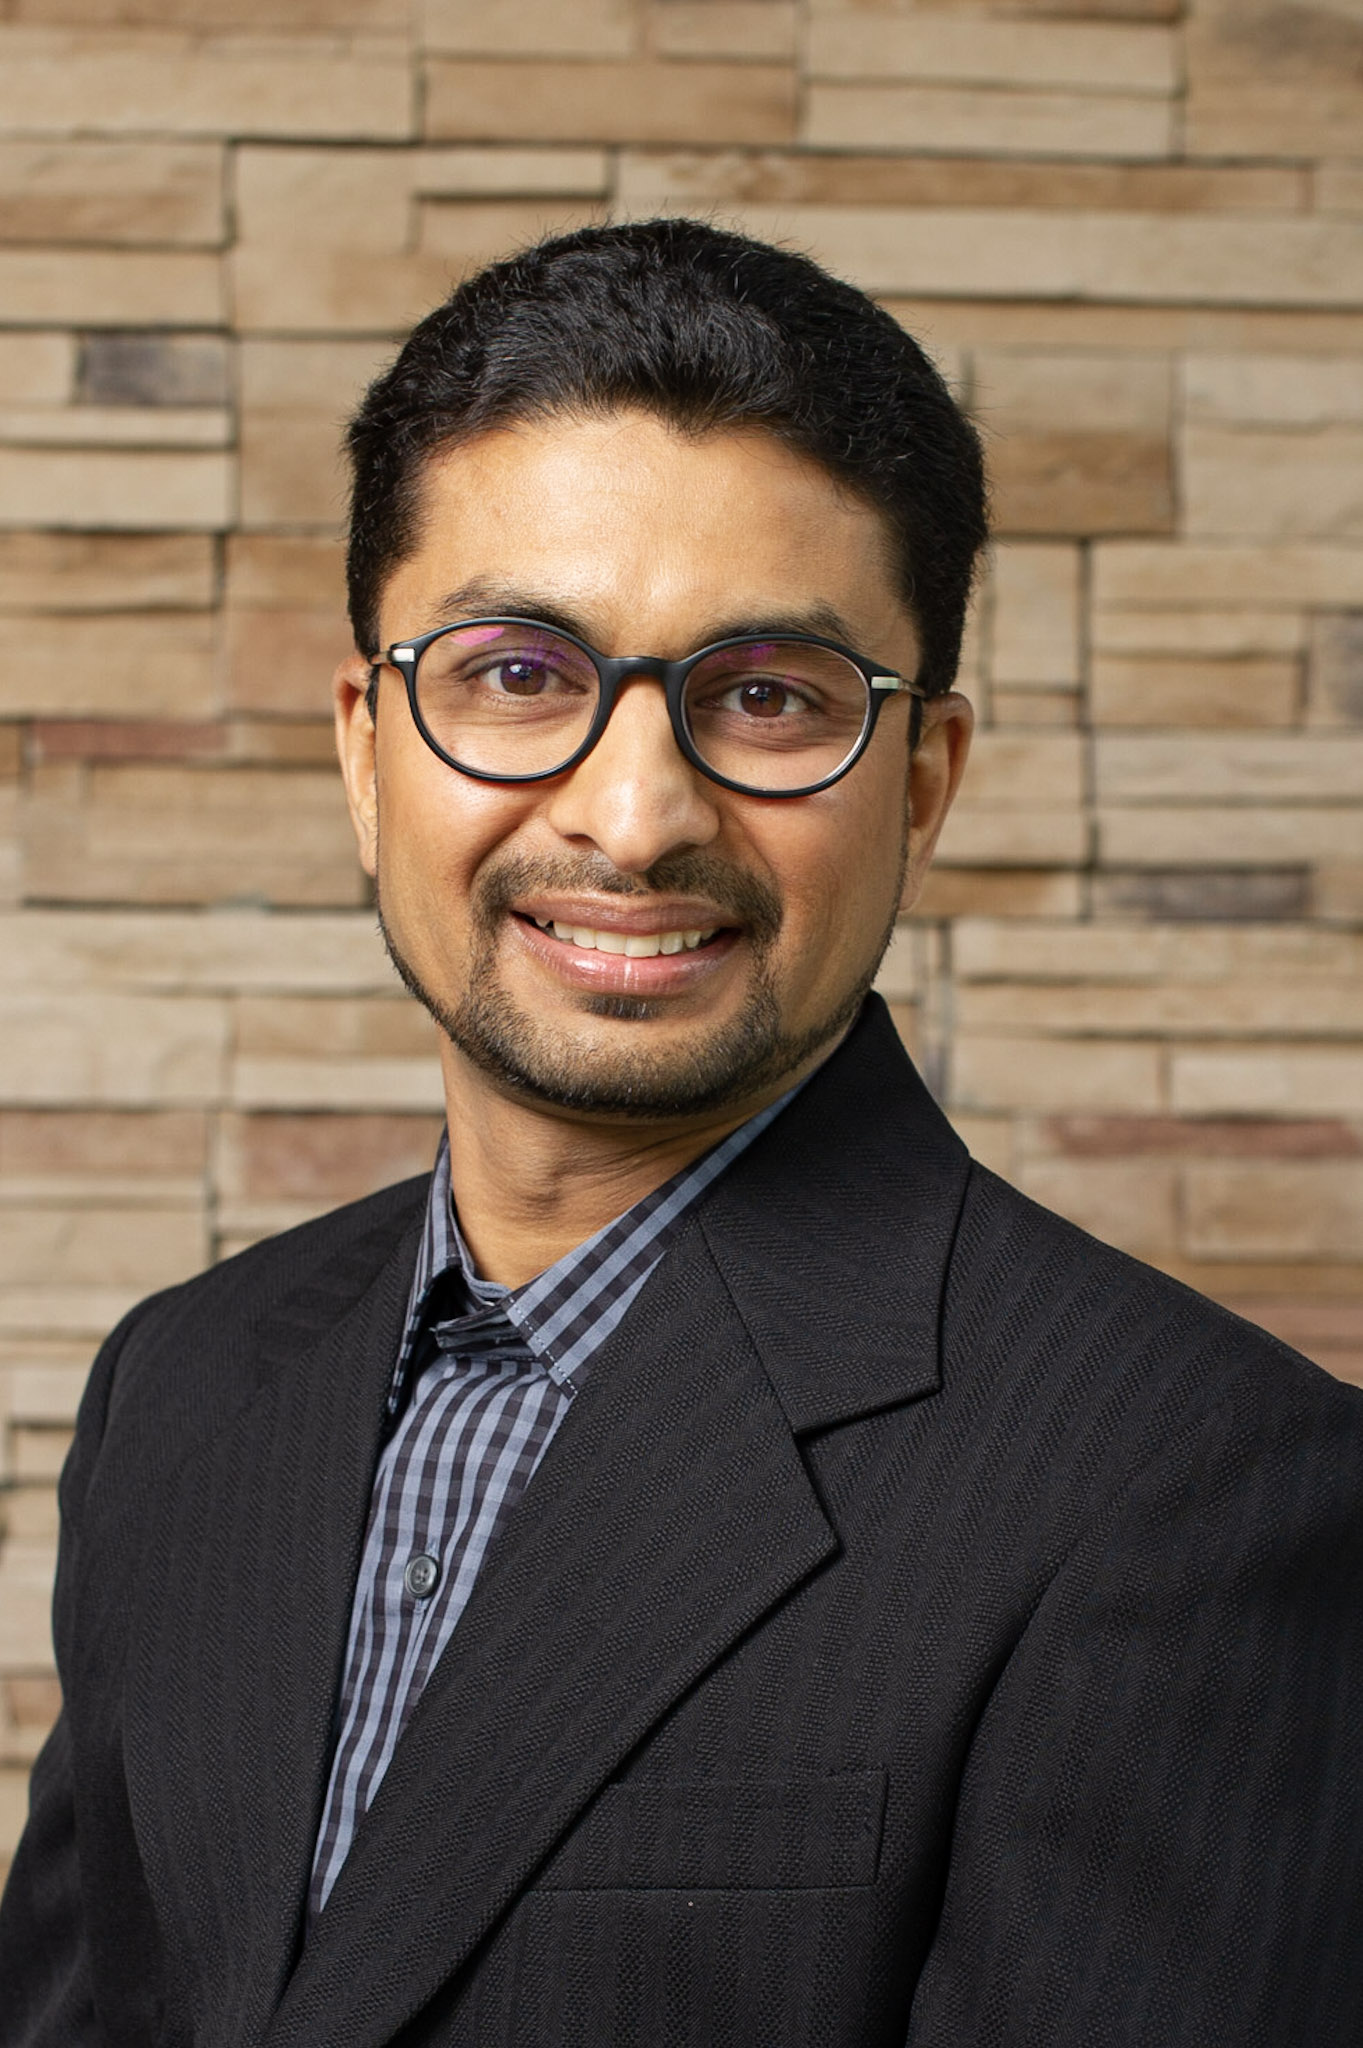 Health and Human Services Technology for High-Value Work (Q&A with Rupam Chokshi, 2018 APHSA Emerging Leader)